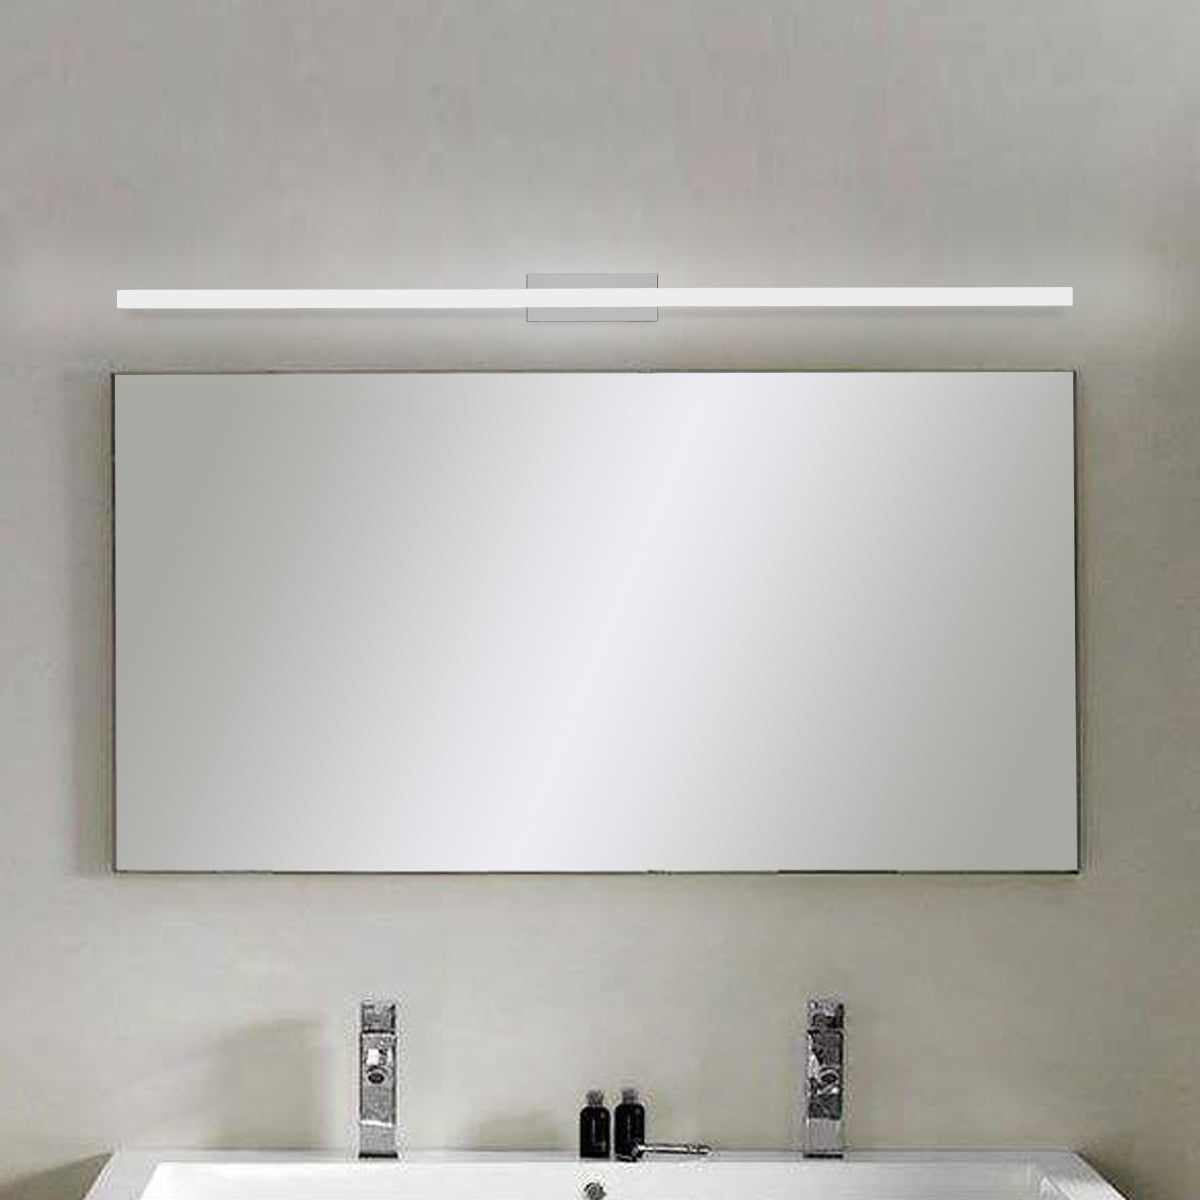 LED SMD 2835 Wall Mount Sconces Light Fixture Bathroom Makeup Mirror Front Lamp 